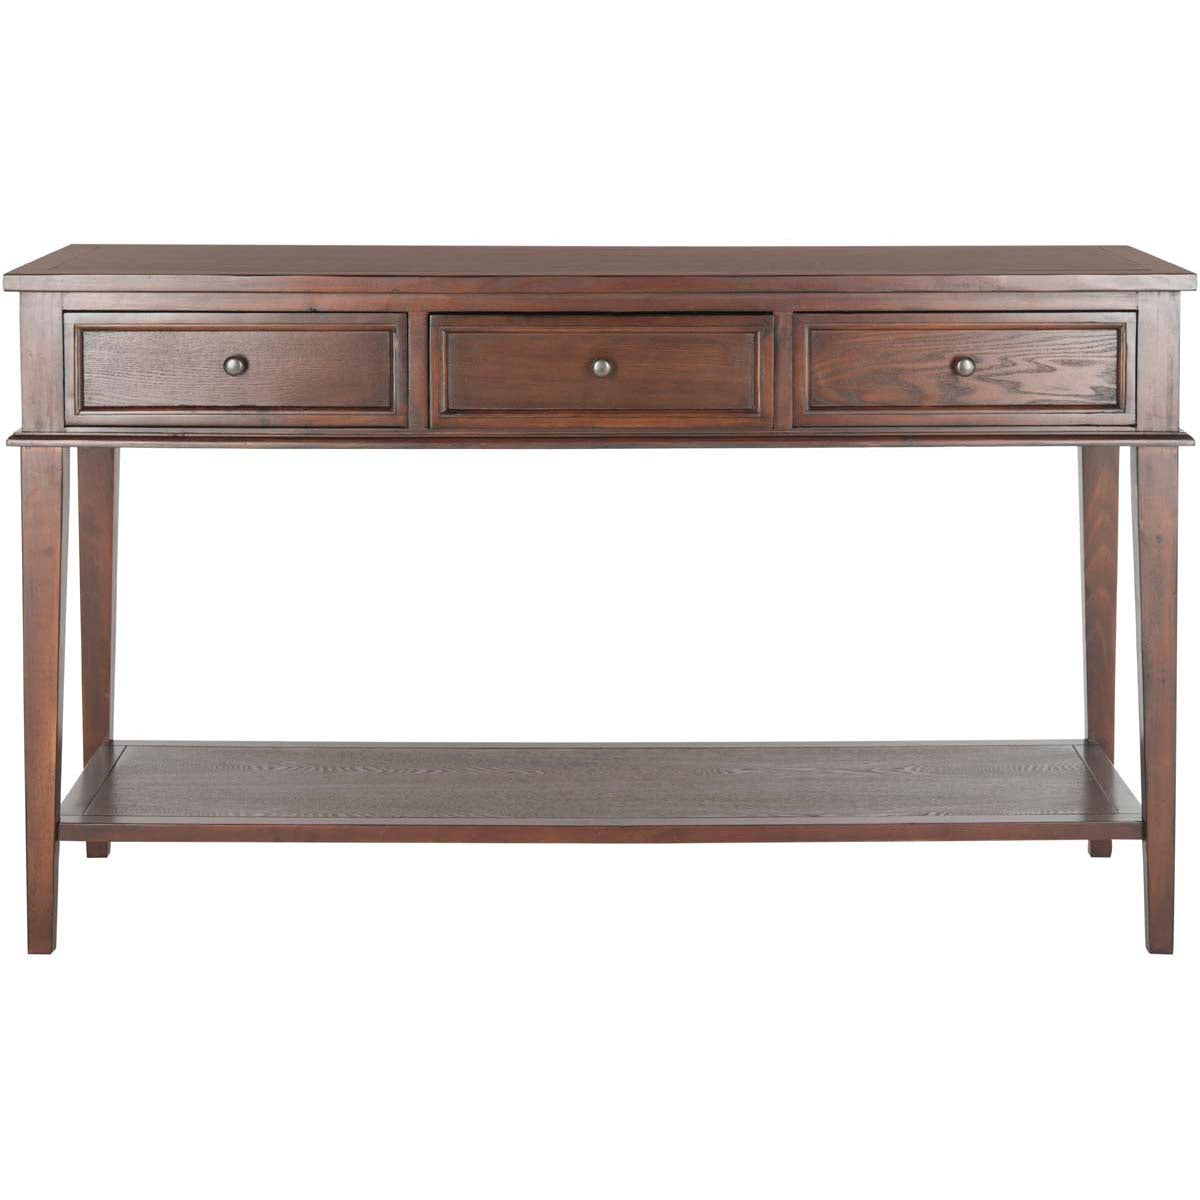 Safavieh Manelin Console With Storage Drawers , AMH6641